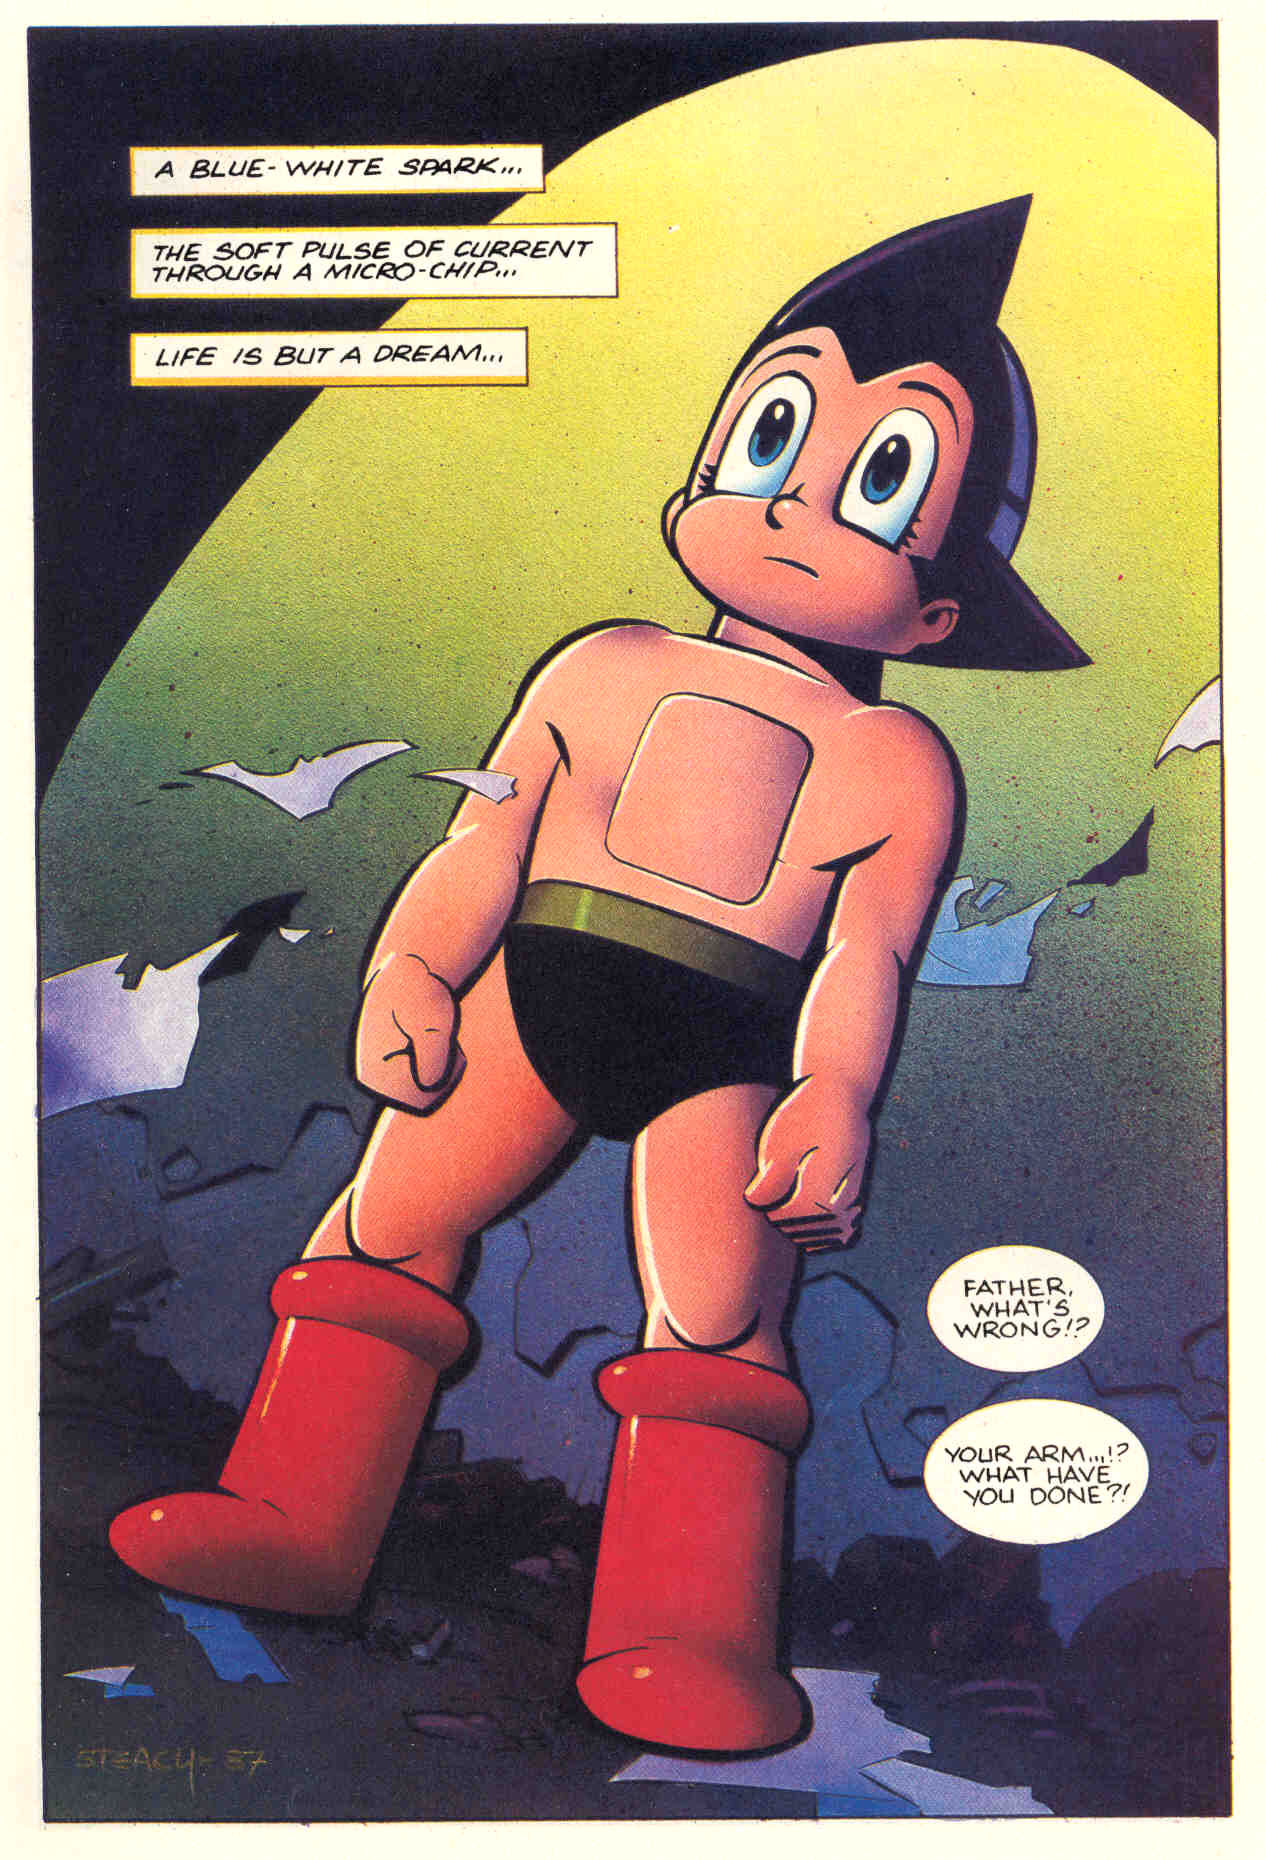 Astro Boy Porn Adult - The Original Astro Boy Issue 2 | Read The Original Astro Boy Issue 2 comic  online in high quality. Read Full Comic online for free - Read comics  online in high quality .